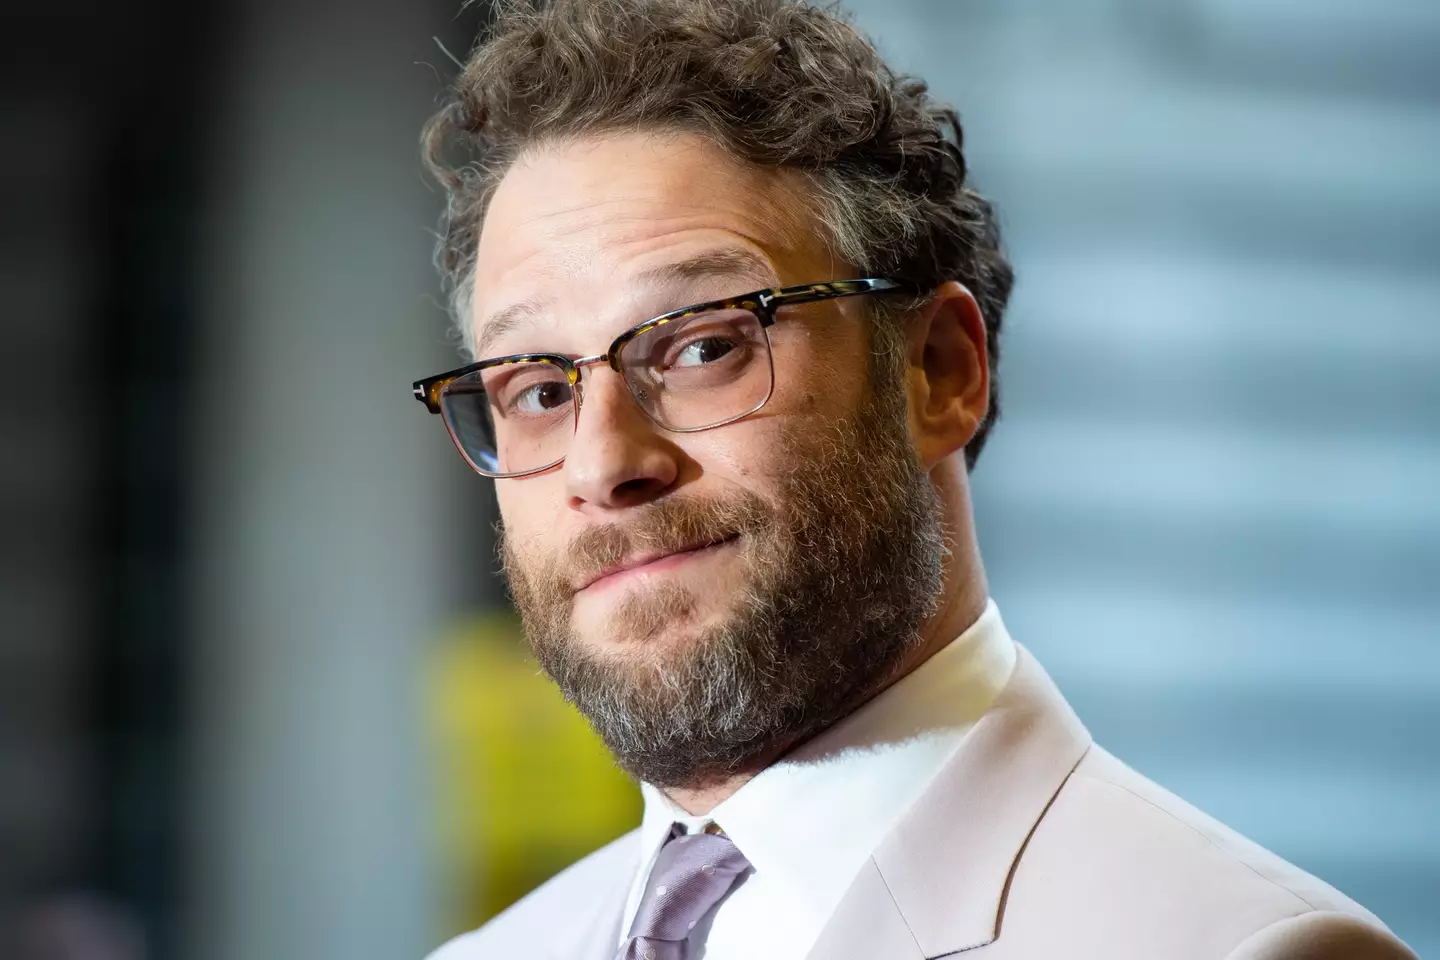 Is Seth Rogen a good guy in real life?